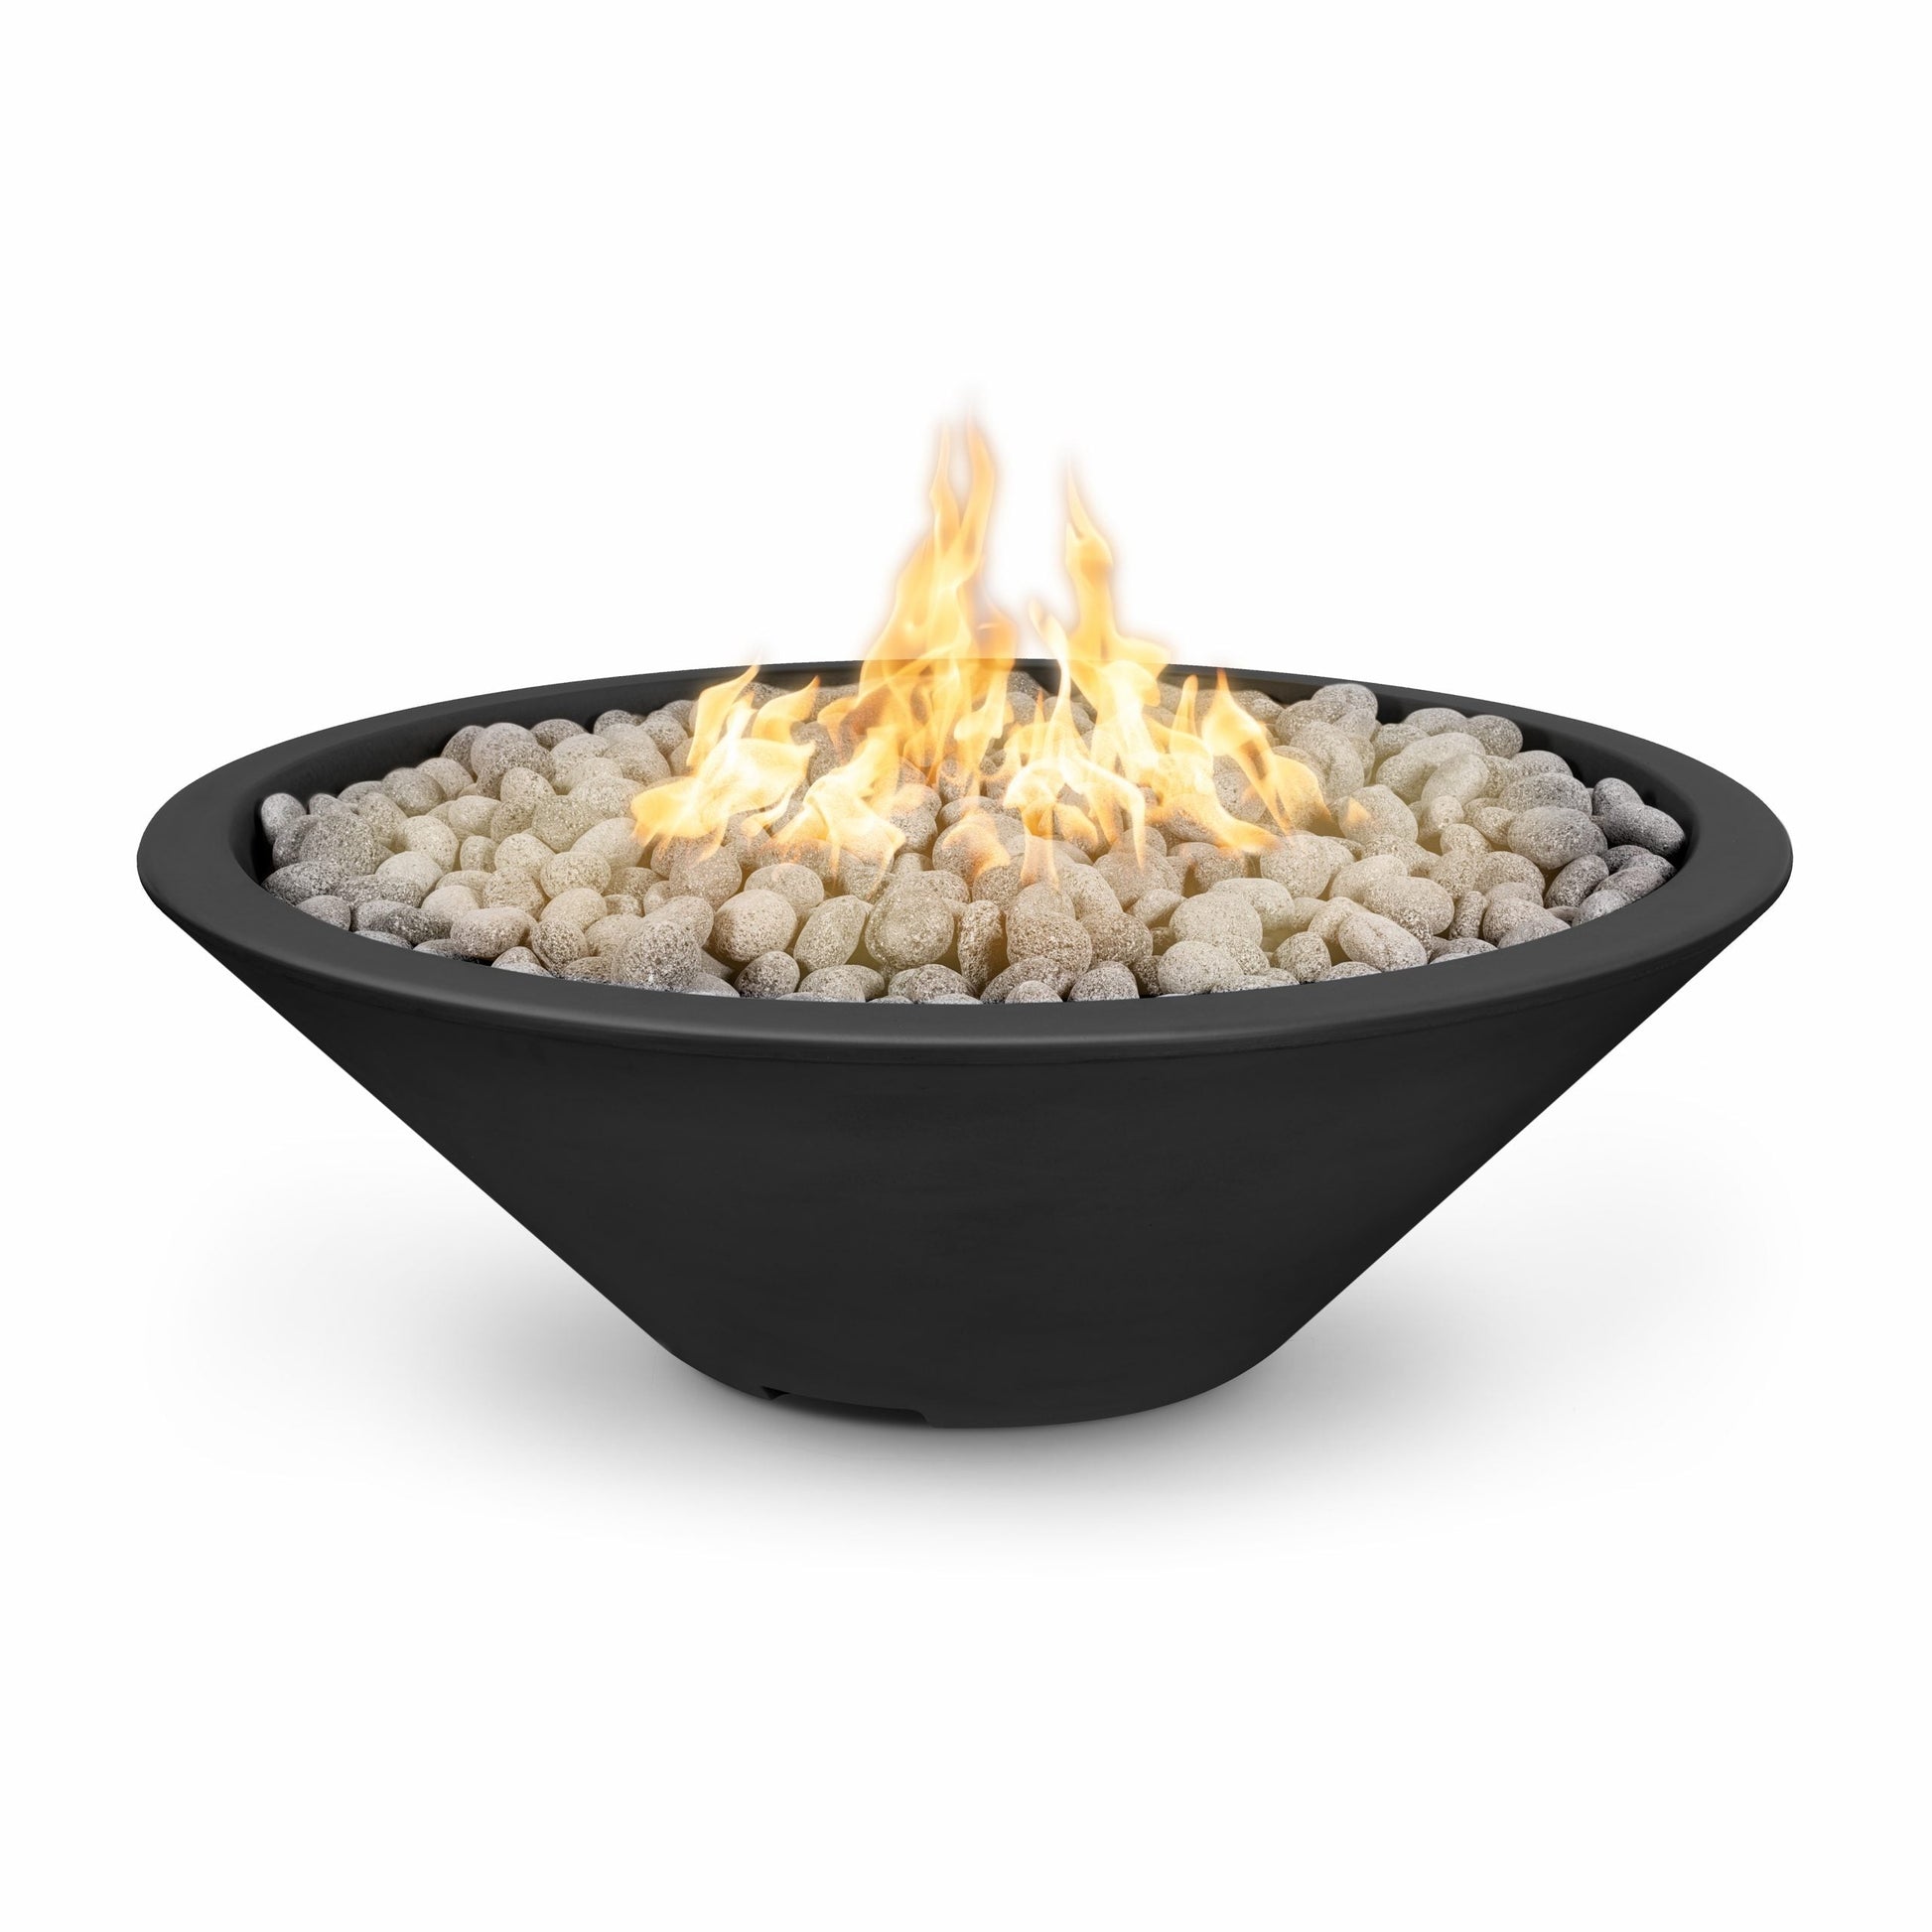 The Outdoor Plus Round Cazo 48" Java Powder Coated Metal Liquid Propane Fire Pit with Match Lit Ignition